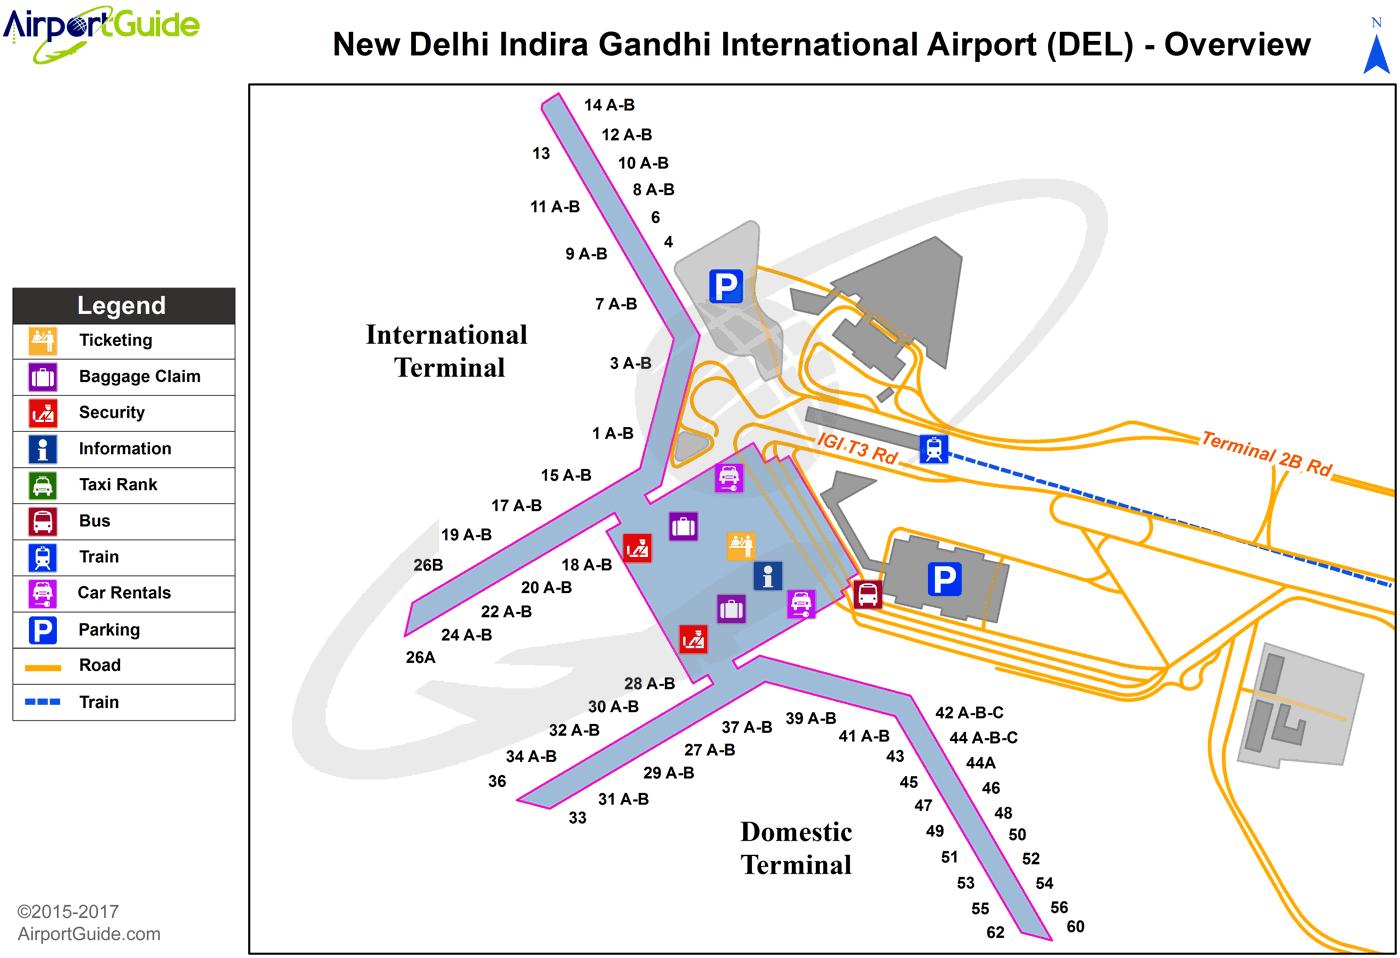 How many terminals are there in Indira Gandhi International Airport?